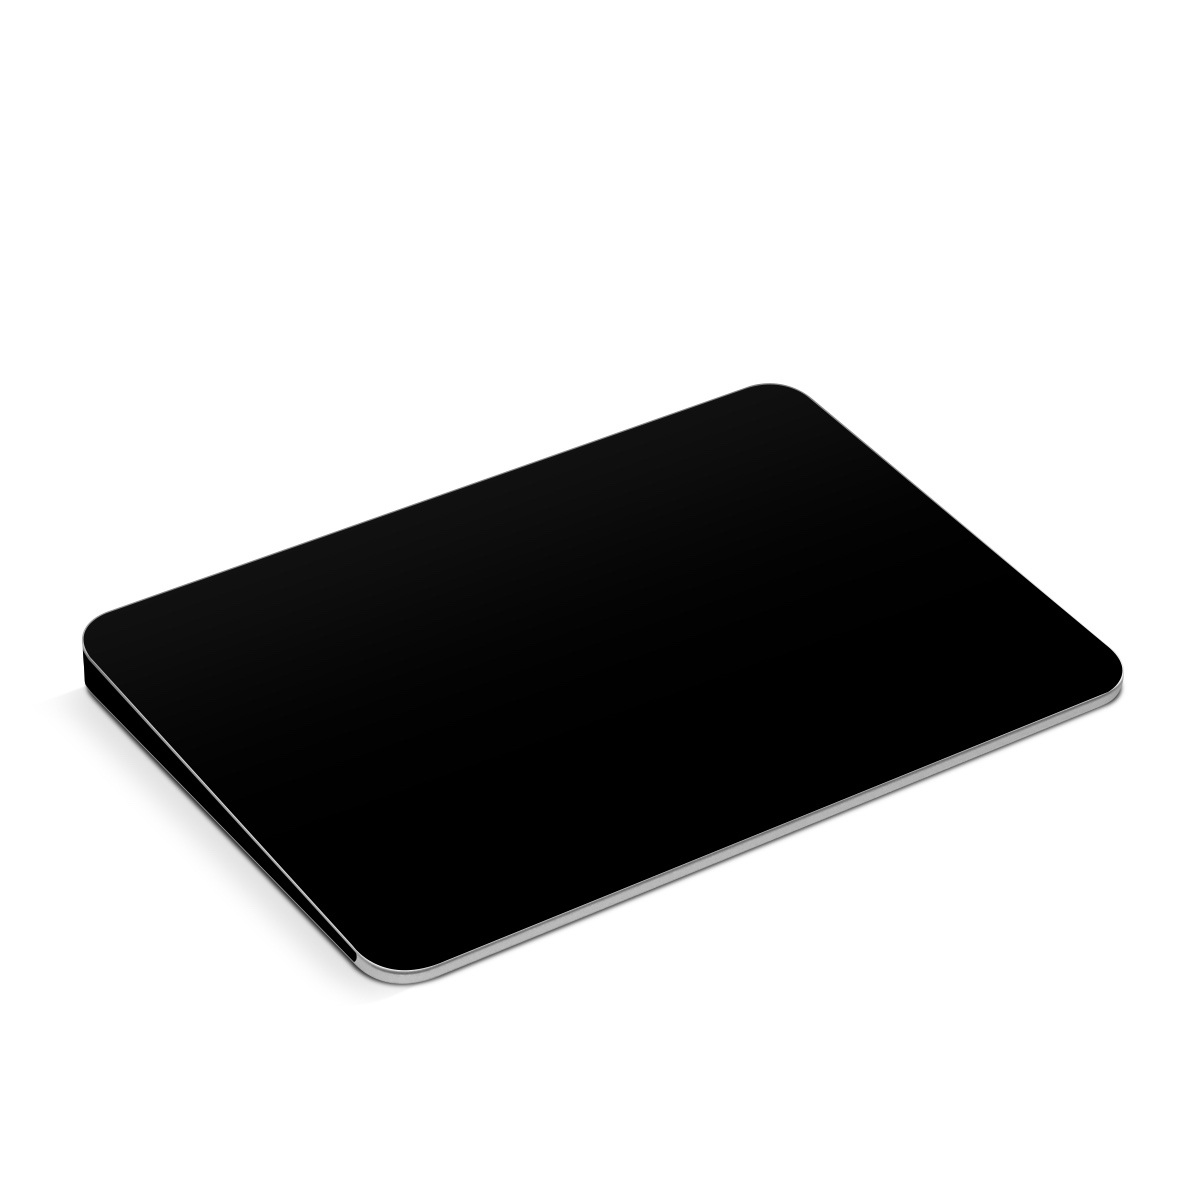 Apple Magic Trackpad 1 Skin design of Black, Darkness, White, Sky, Light, Red, Text, Brown, Font, Atmosphere, with black colors